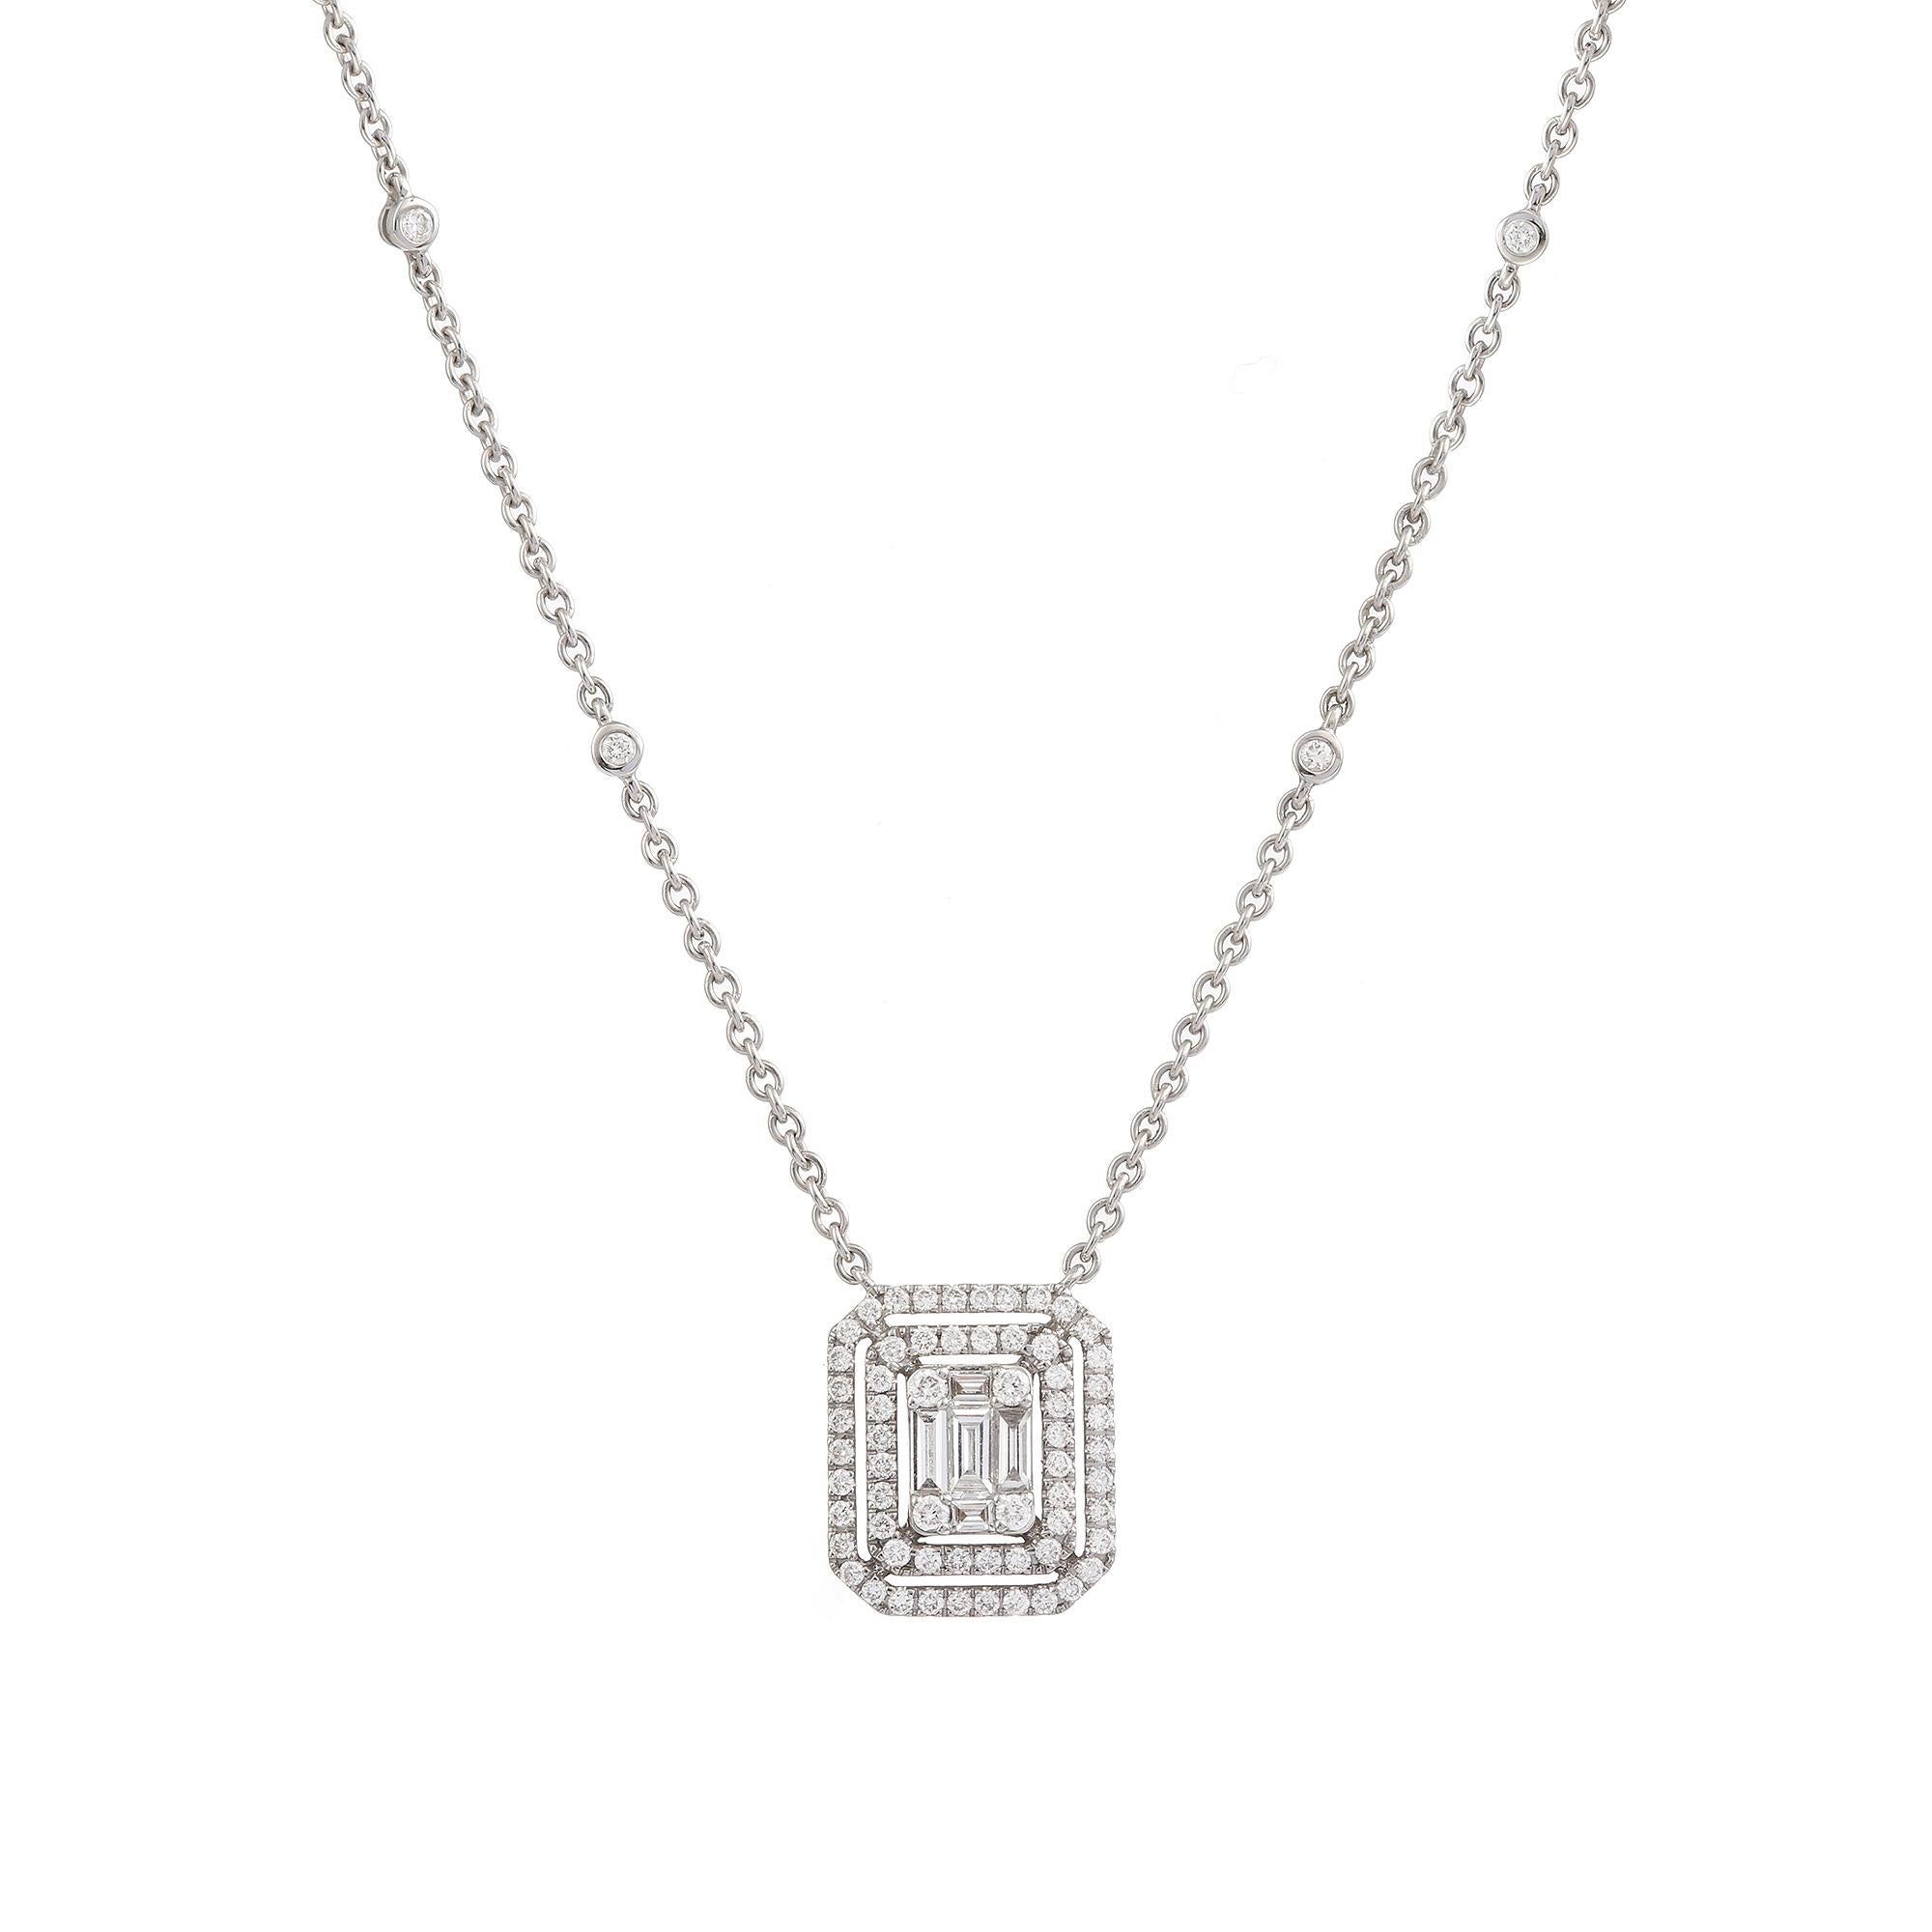 Charming white gold necklace set with brilliant-cut and baguette-cut diamonds forming an emerald-cut effect.

Total weight of diamonds: 0.45 carats

Length: 40 or 46 cm (15.74 or 18.11 inches)

Dimensions: 12.07 x 10.52 x 3.49 mm (0.475 x 0.414 x